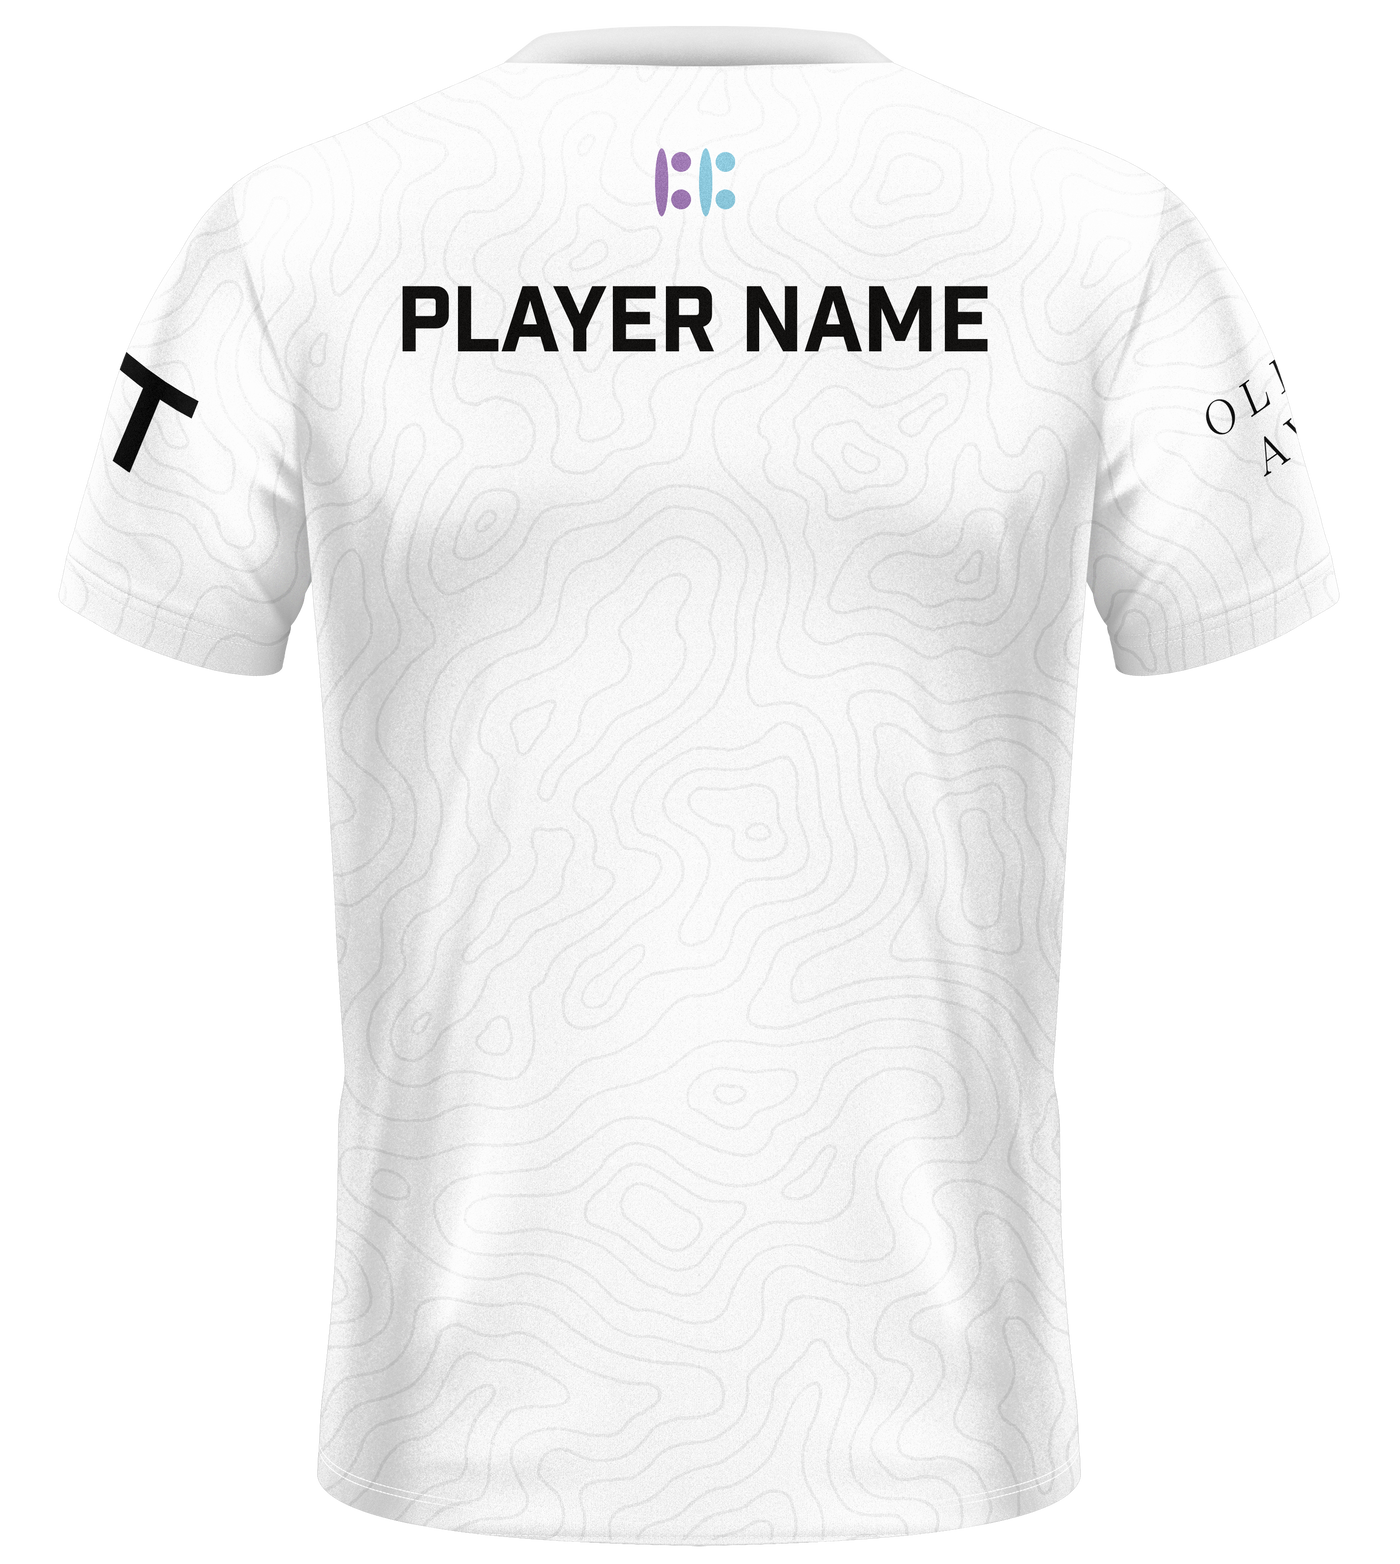 Built By Gamers White Pro Jersey